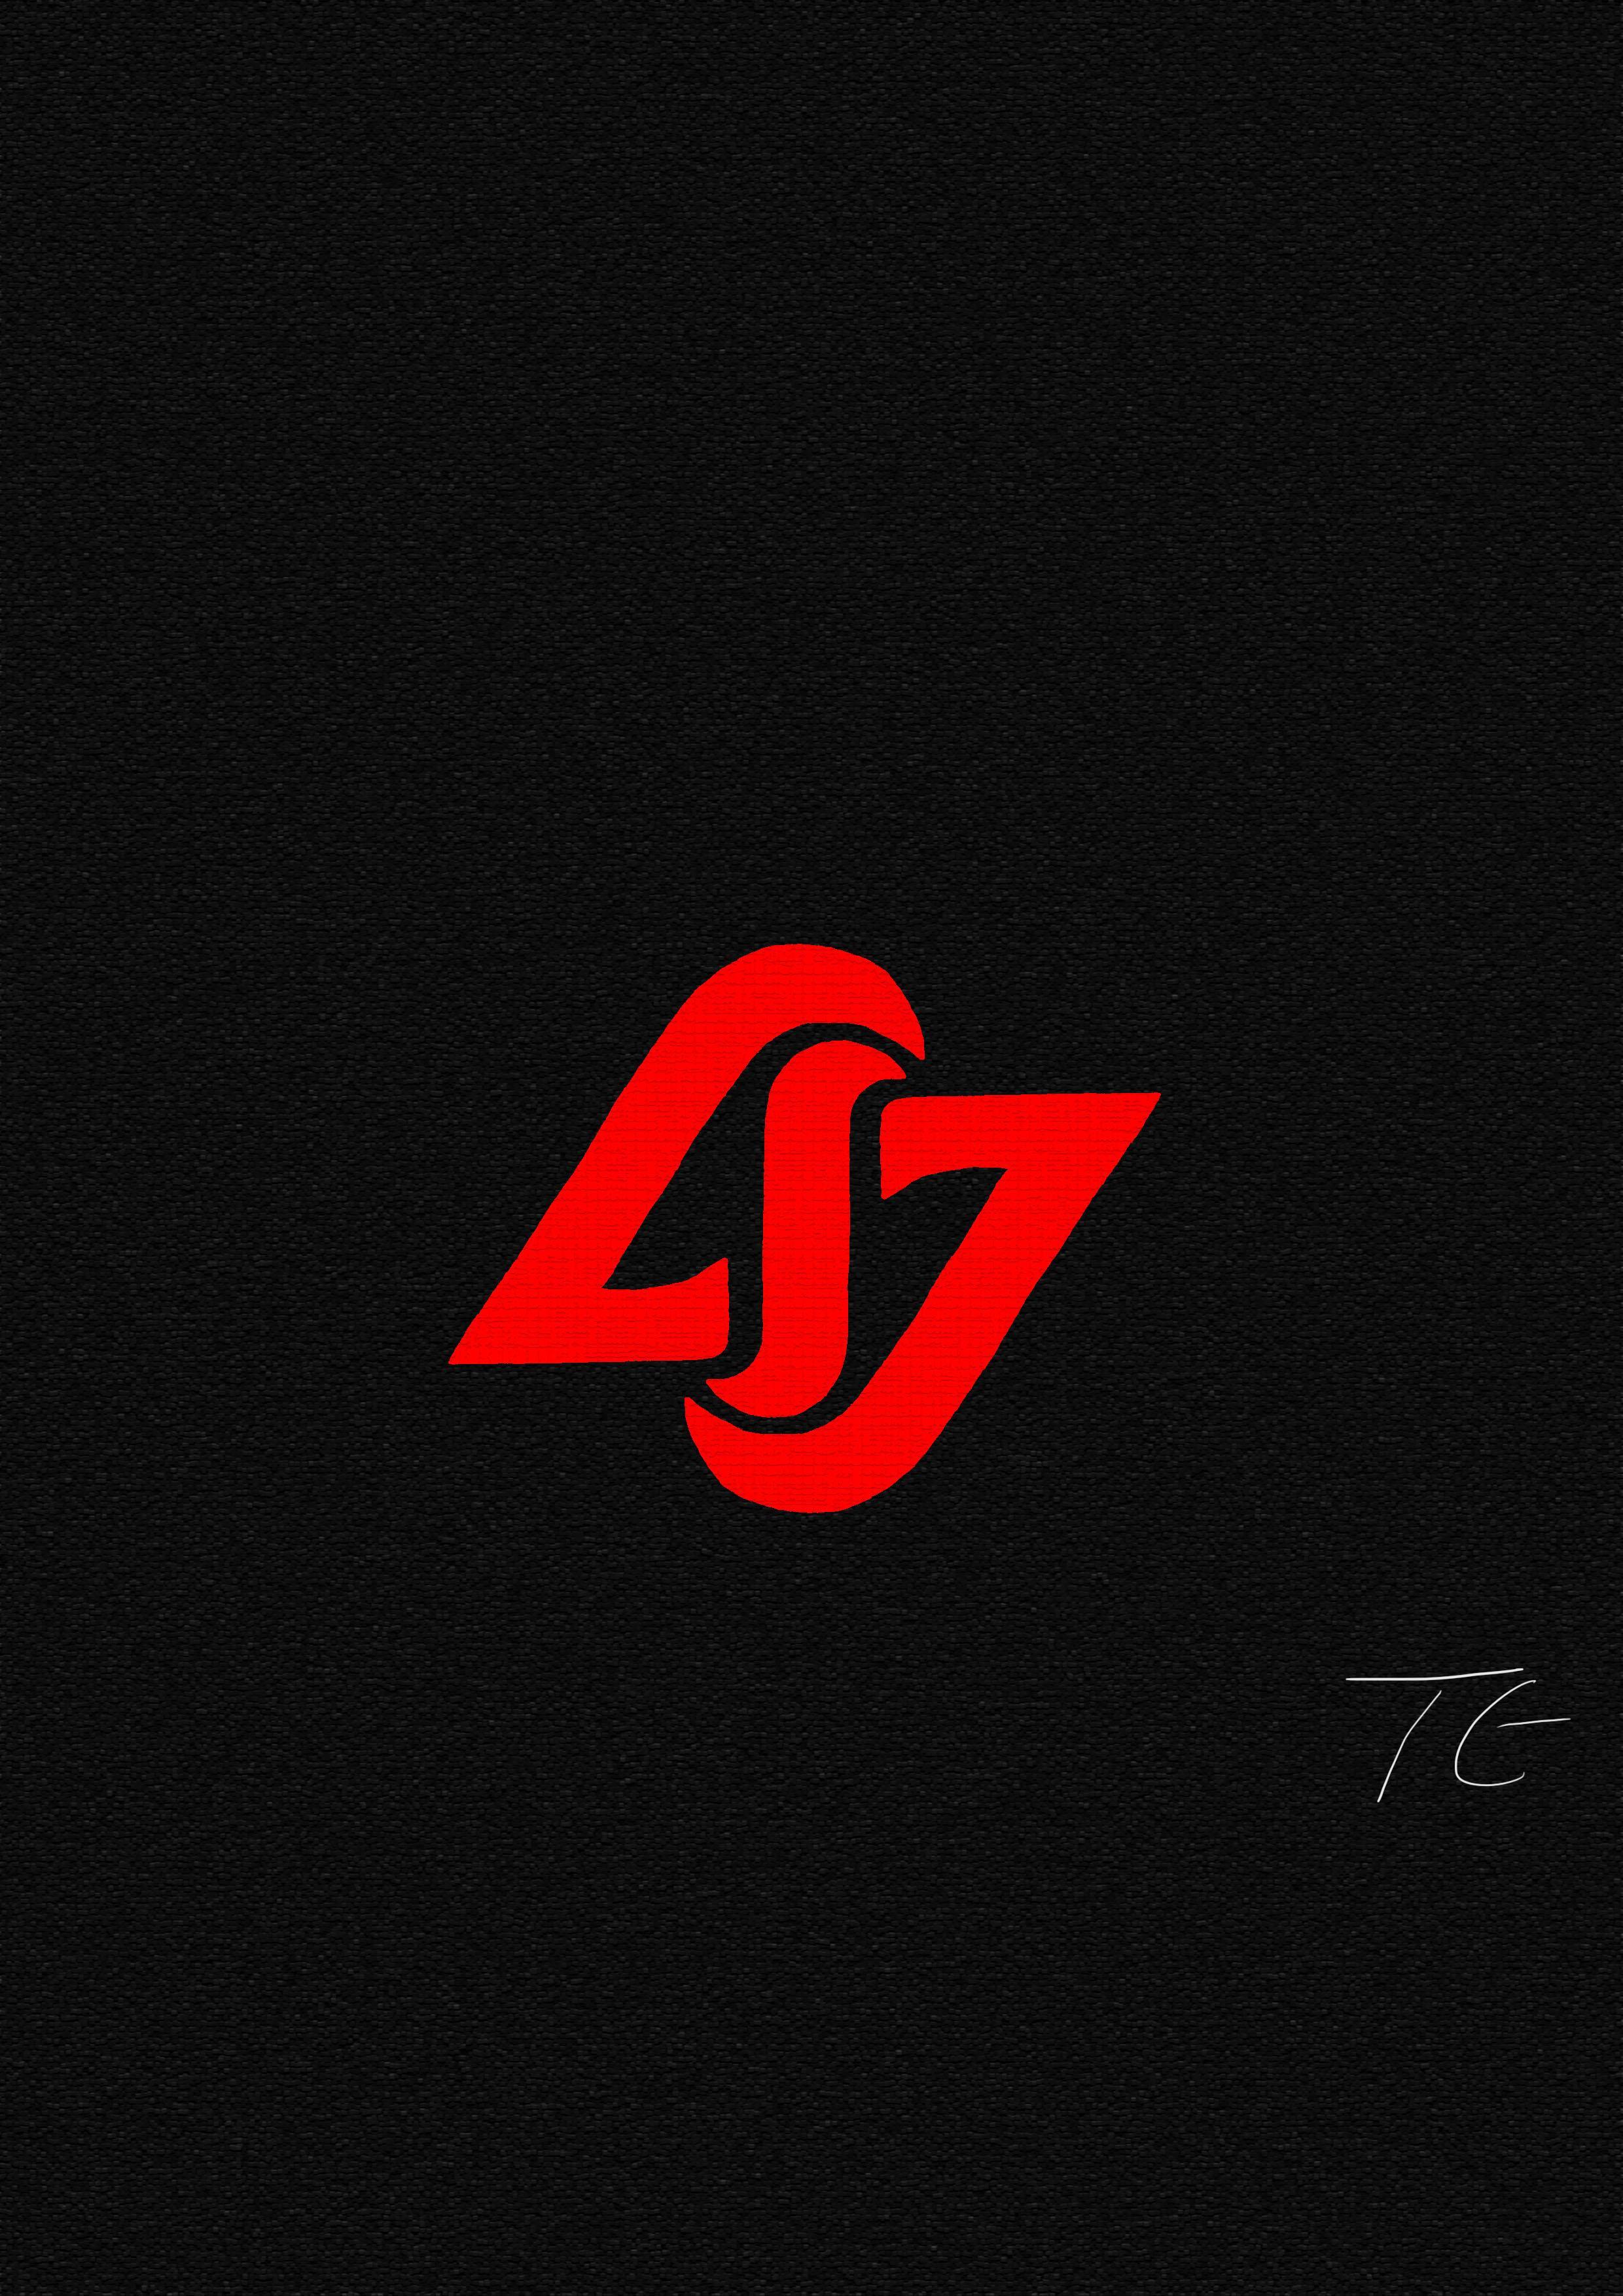 CLG Logo - Community Just finished taking a shot at hand drawing a clg logo